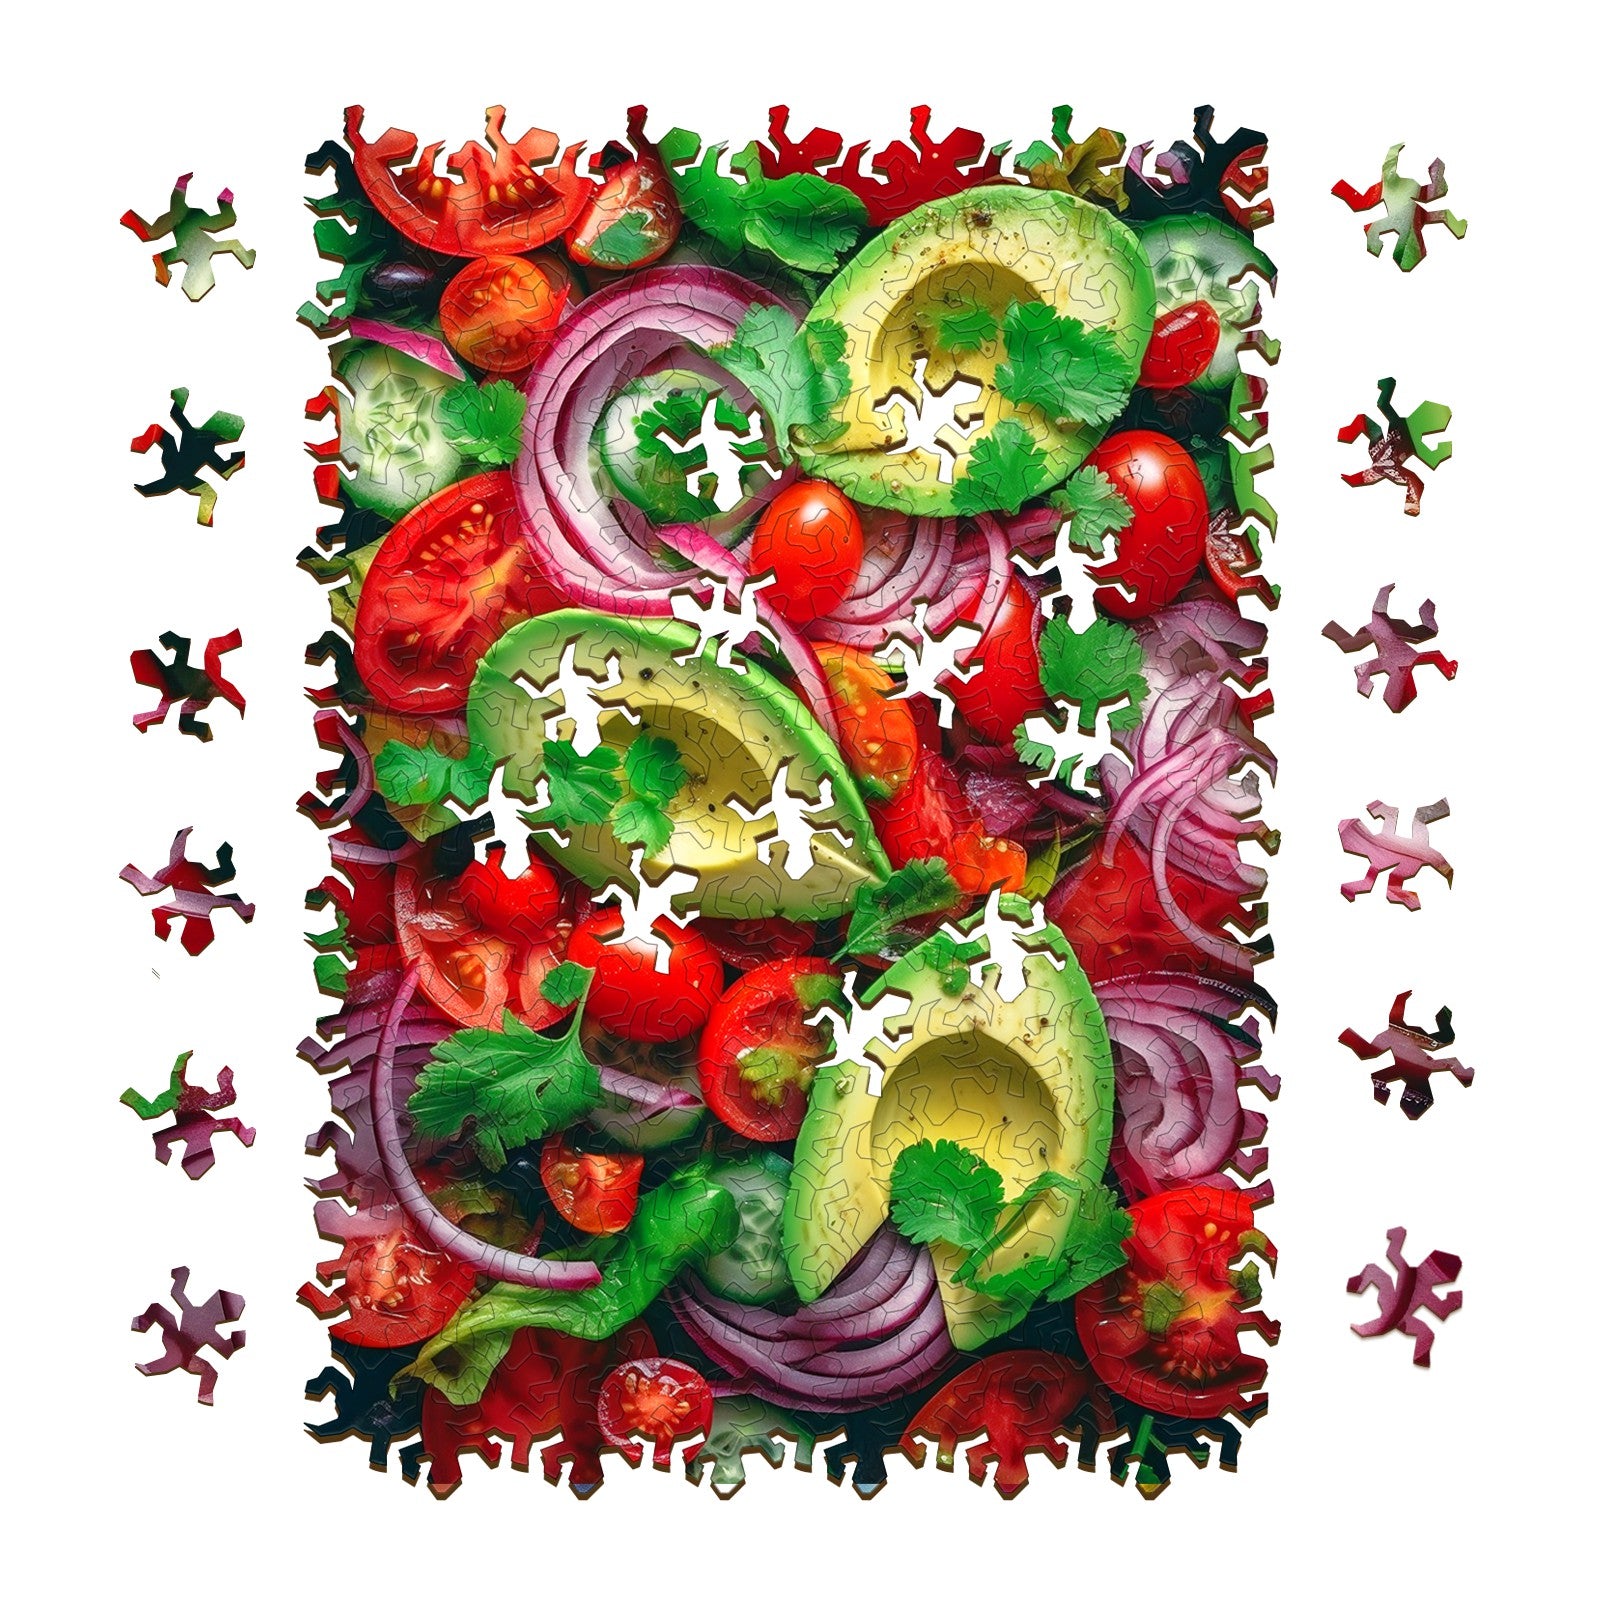 Vegetable Salad Wooden Jigsaw Puzzle